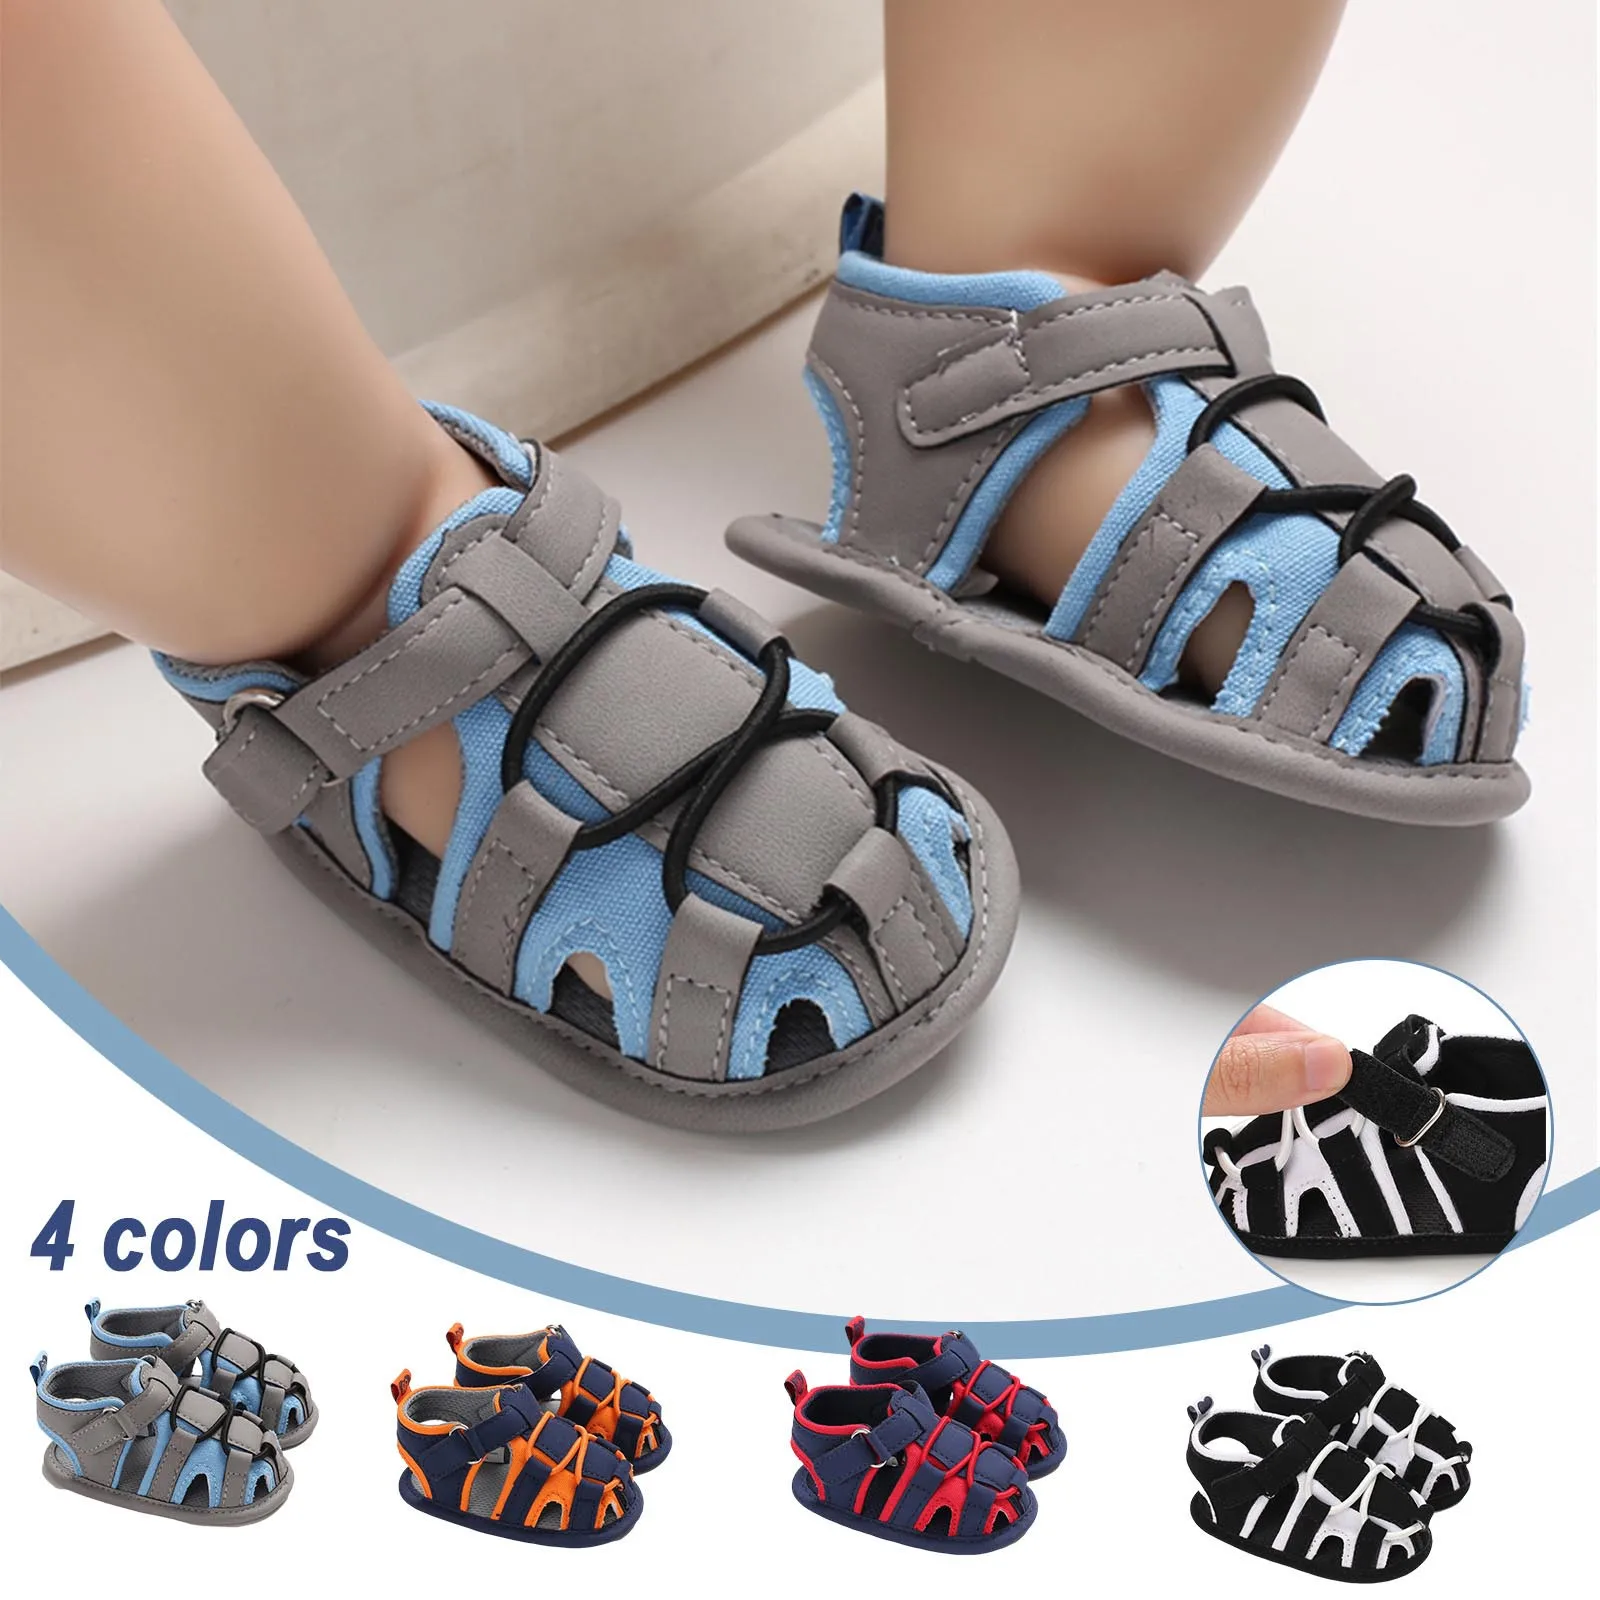 

Baby boy shoes Baby sandals Baby Kids Boys Girls Sandals Summer Hollow Soft Flat Shoes Infant First Walkers сандали для мальчика